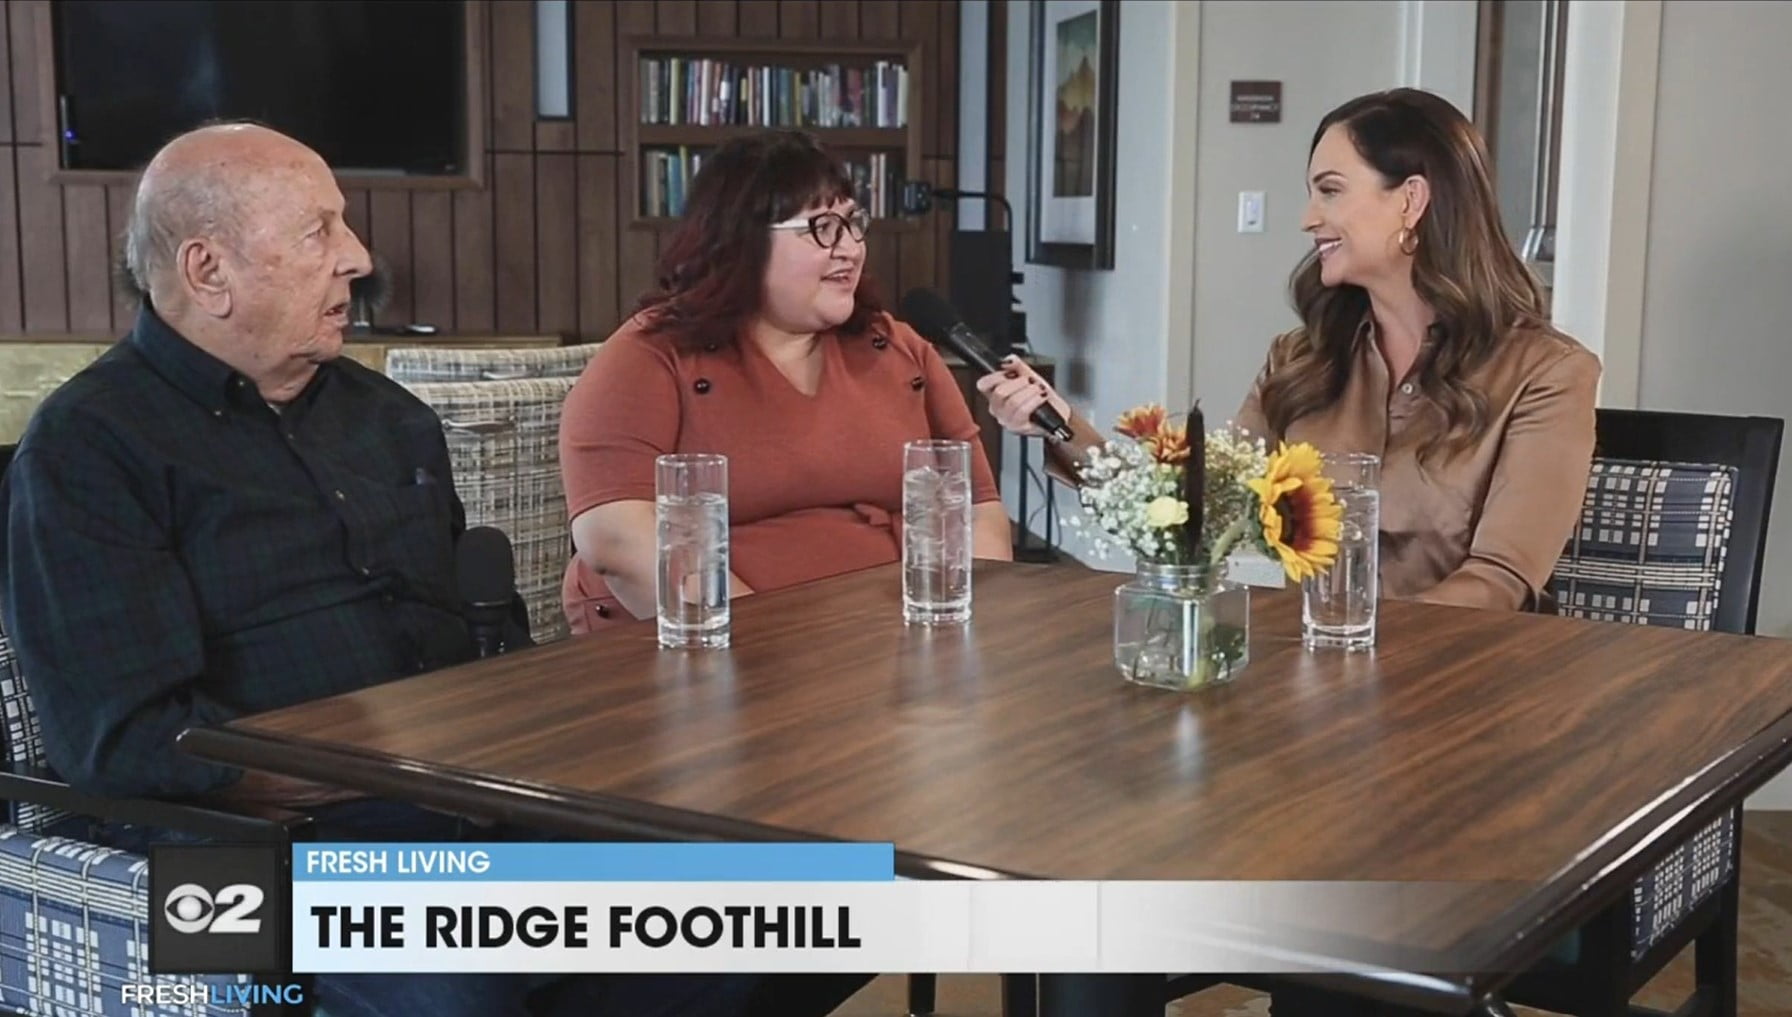 KUTV's Fresh Living interviews two people from The Ridge at a dining table at the senior living community